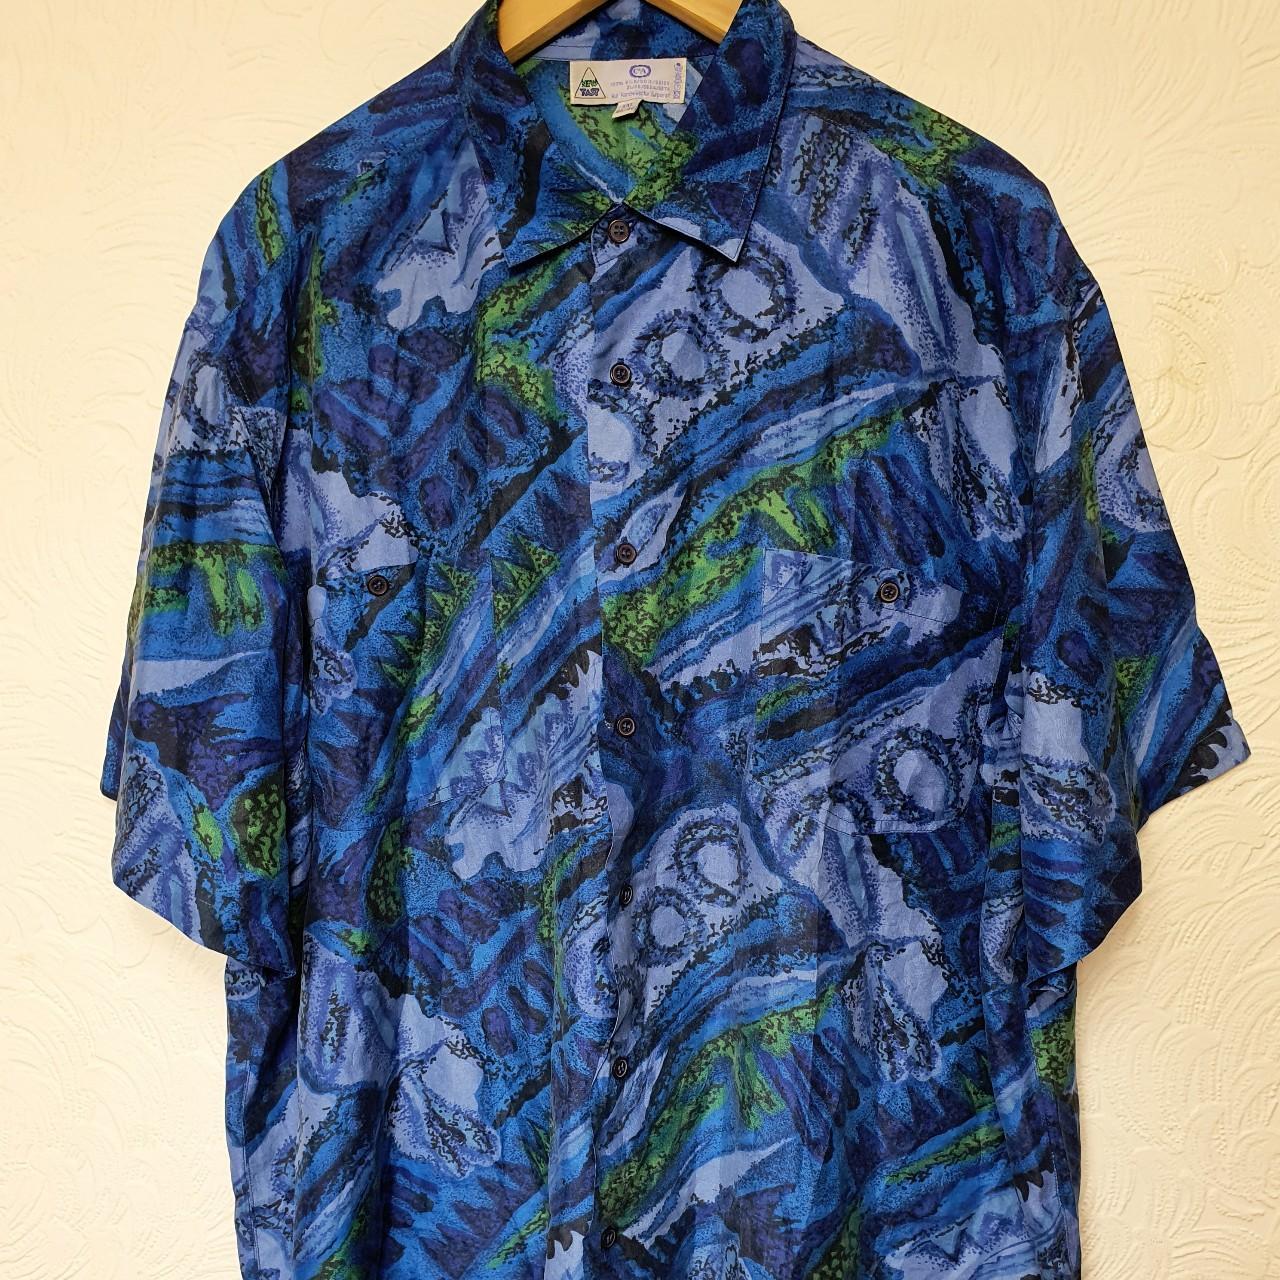 Vintage 90s 100% Silk Shirt Funky abstract patterned... - Depop